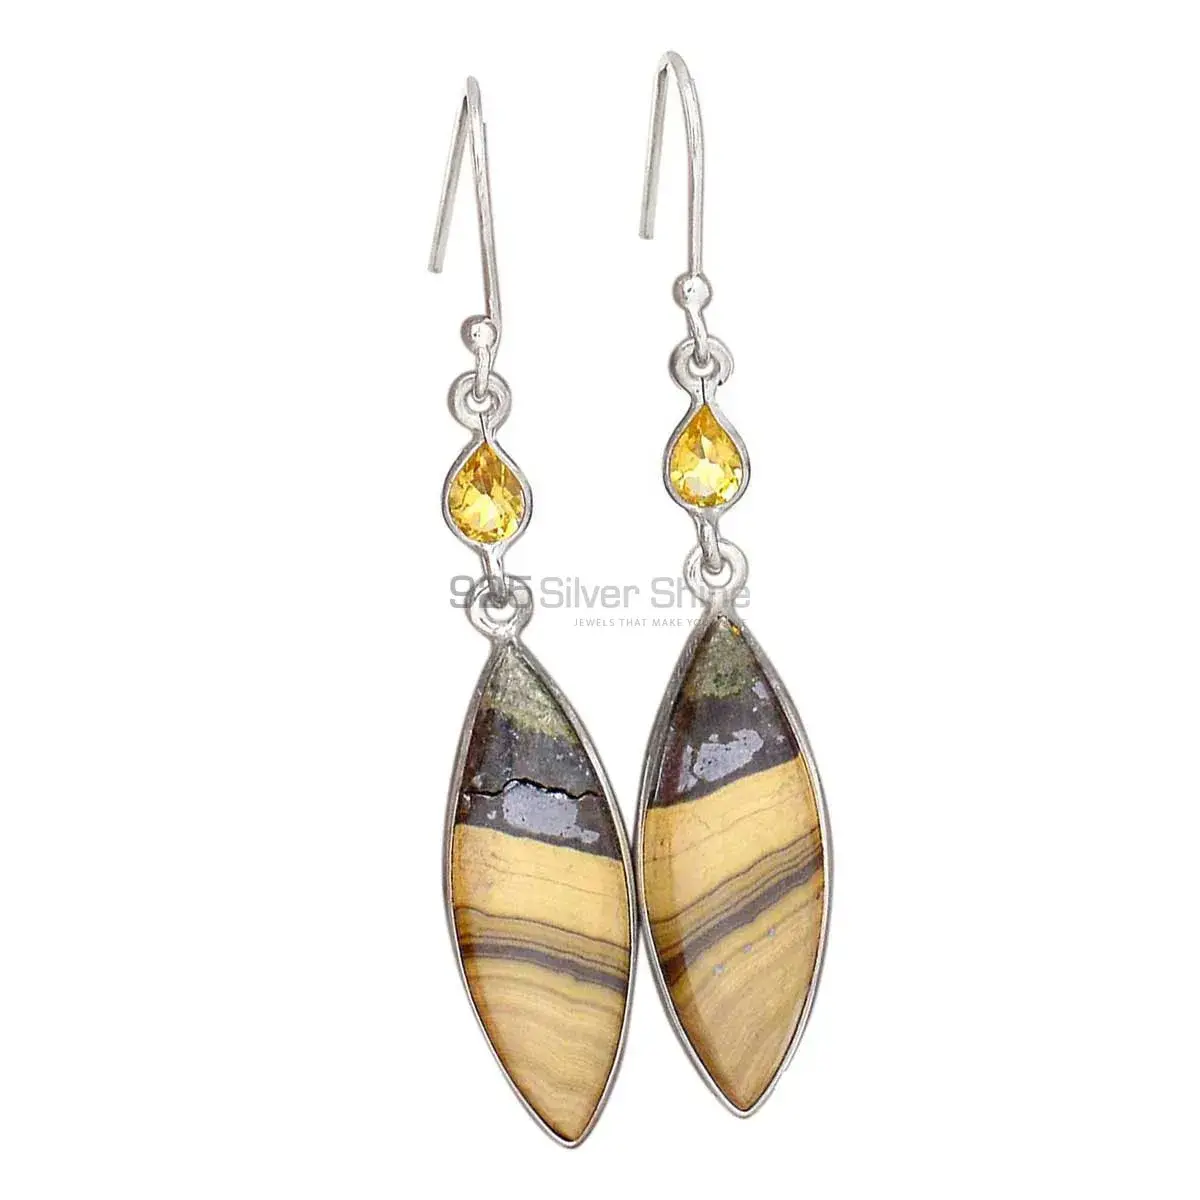 Affordable 925 Sterling Silver Handmade Earrings Manufacturer In Multi Gemstone Jewelry 925SE2789_5